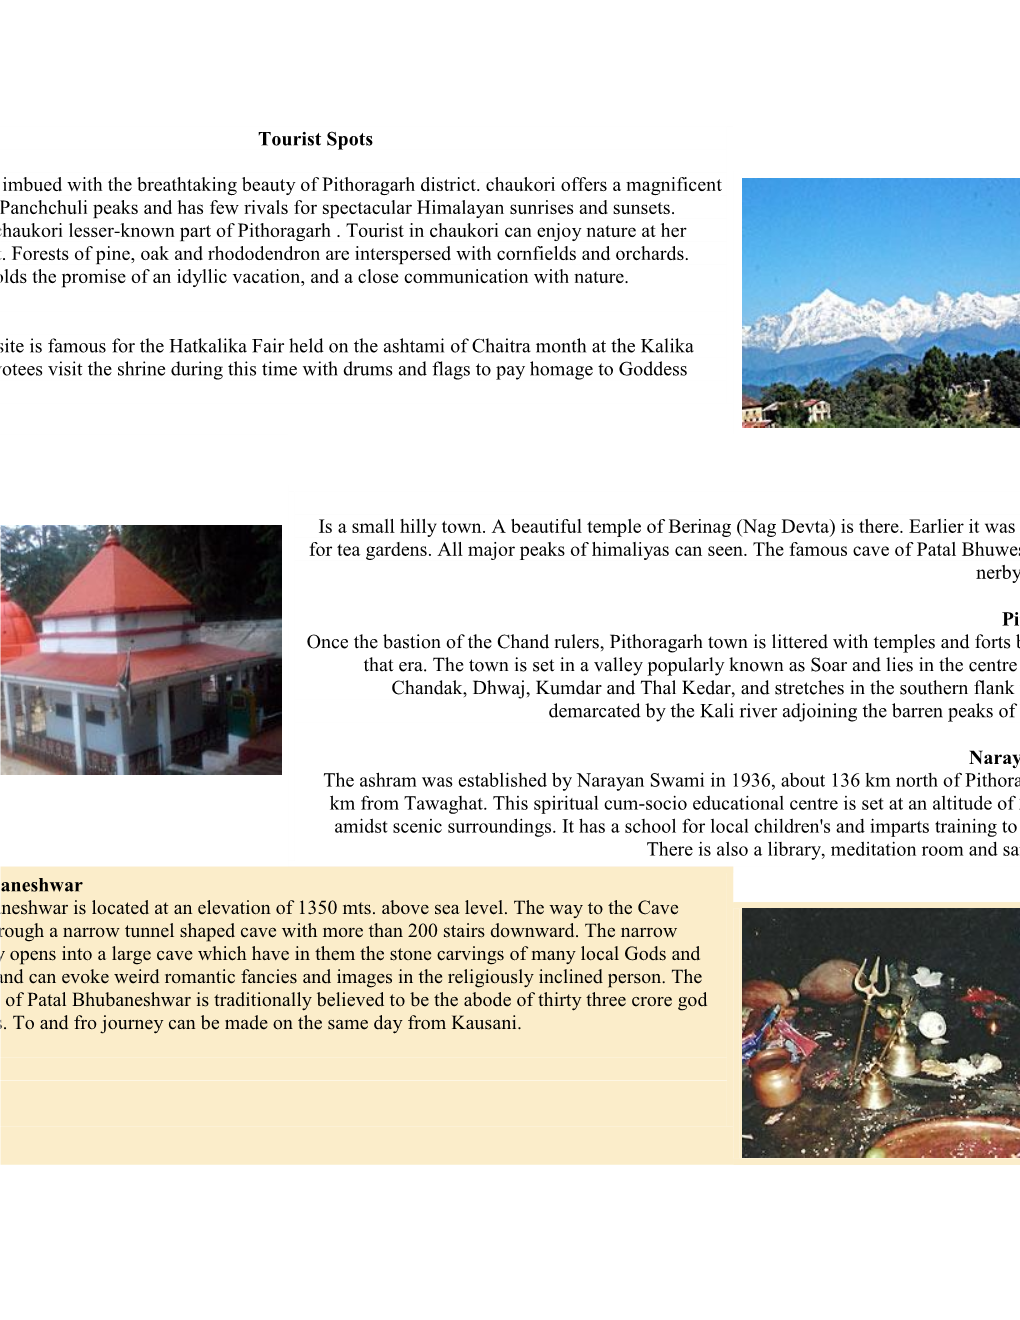 Tourist Spots Chaukori Chaukori Is Imbued with the Breathtaking Beauty of Pithoragarh District